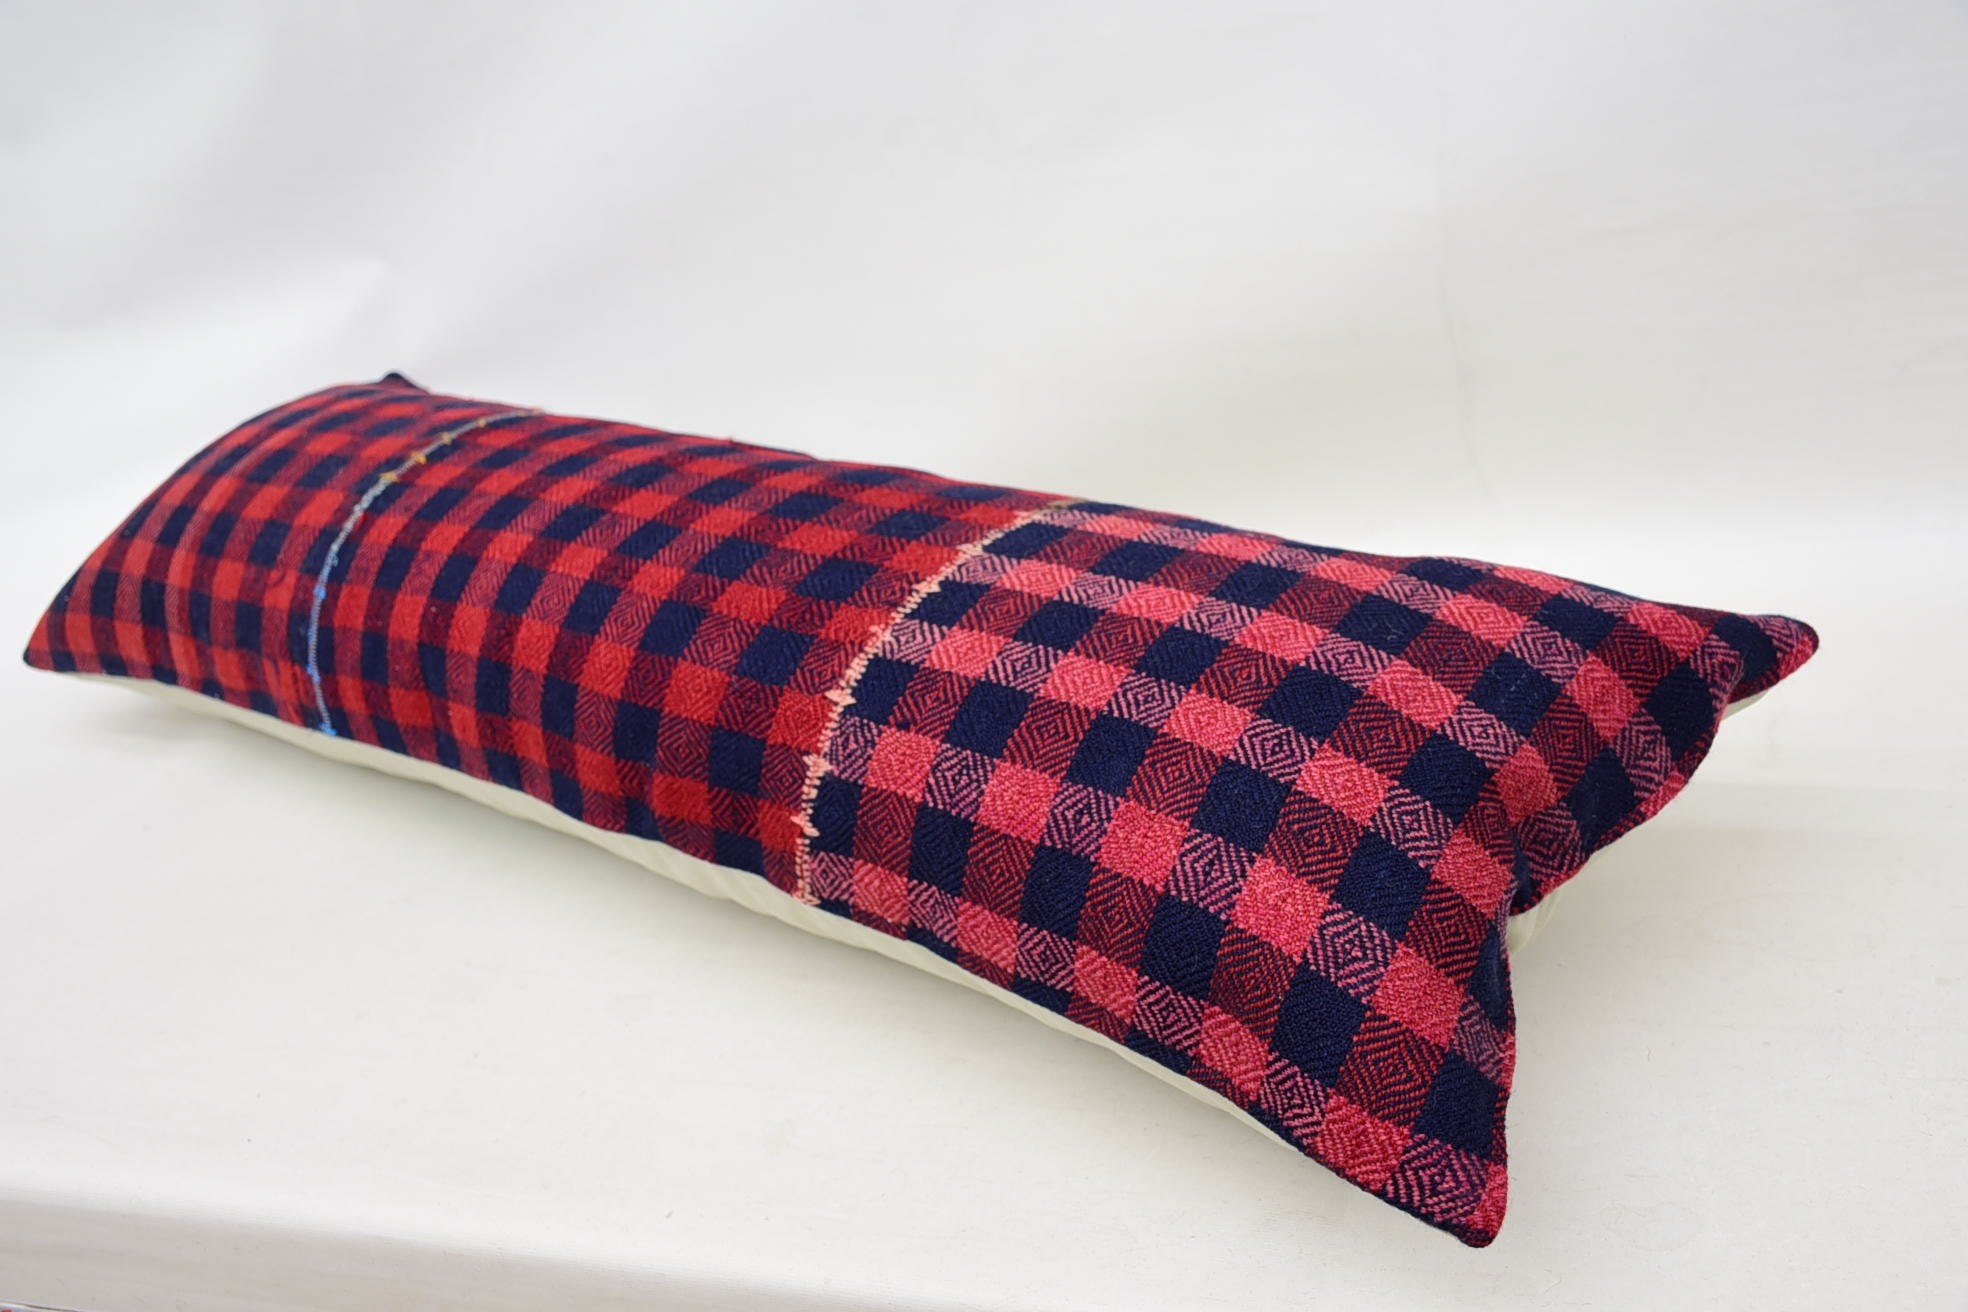 16"x48" Red Cushion Case, Pillow for Couch, Kilim Rug Pillow Sham, Kilim Cushion Sham, Ethnical Kilim Rug Pillow, Couch Pillow Cover